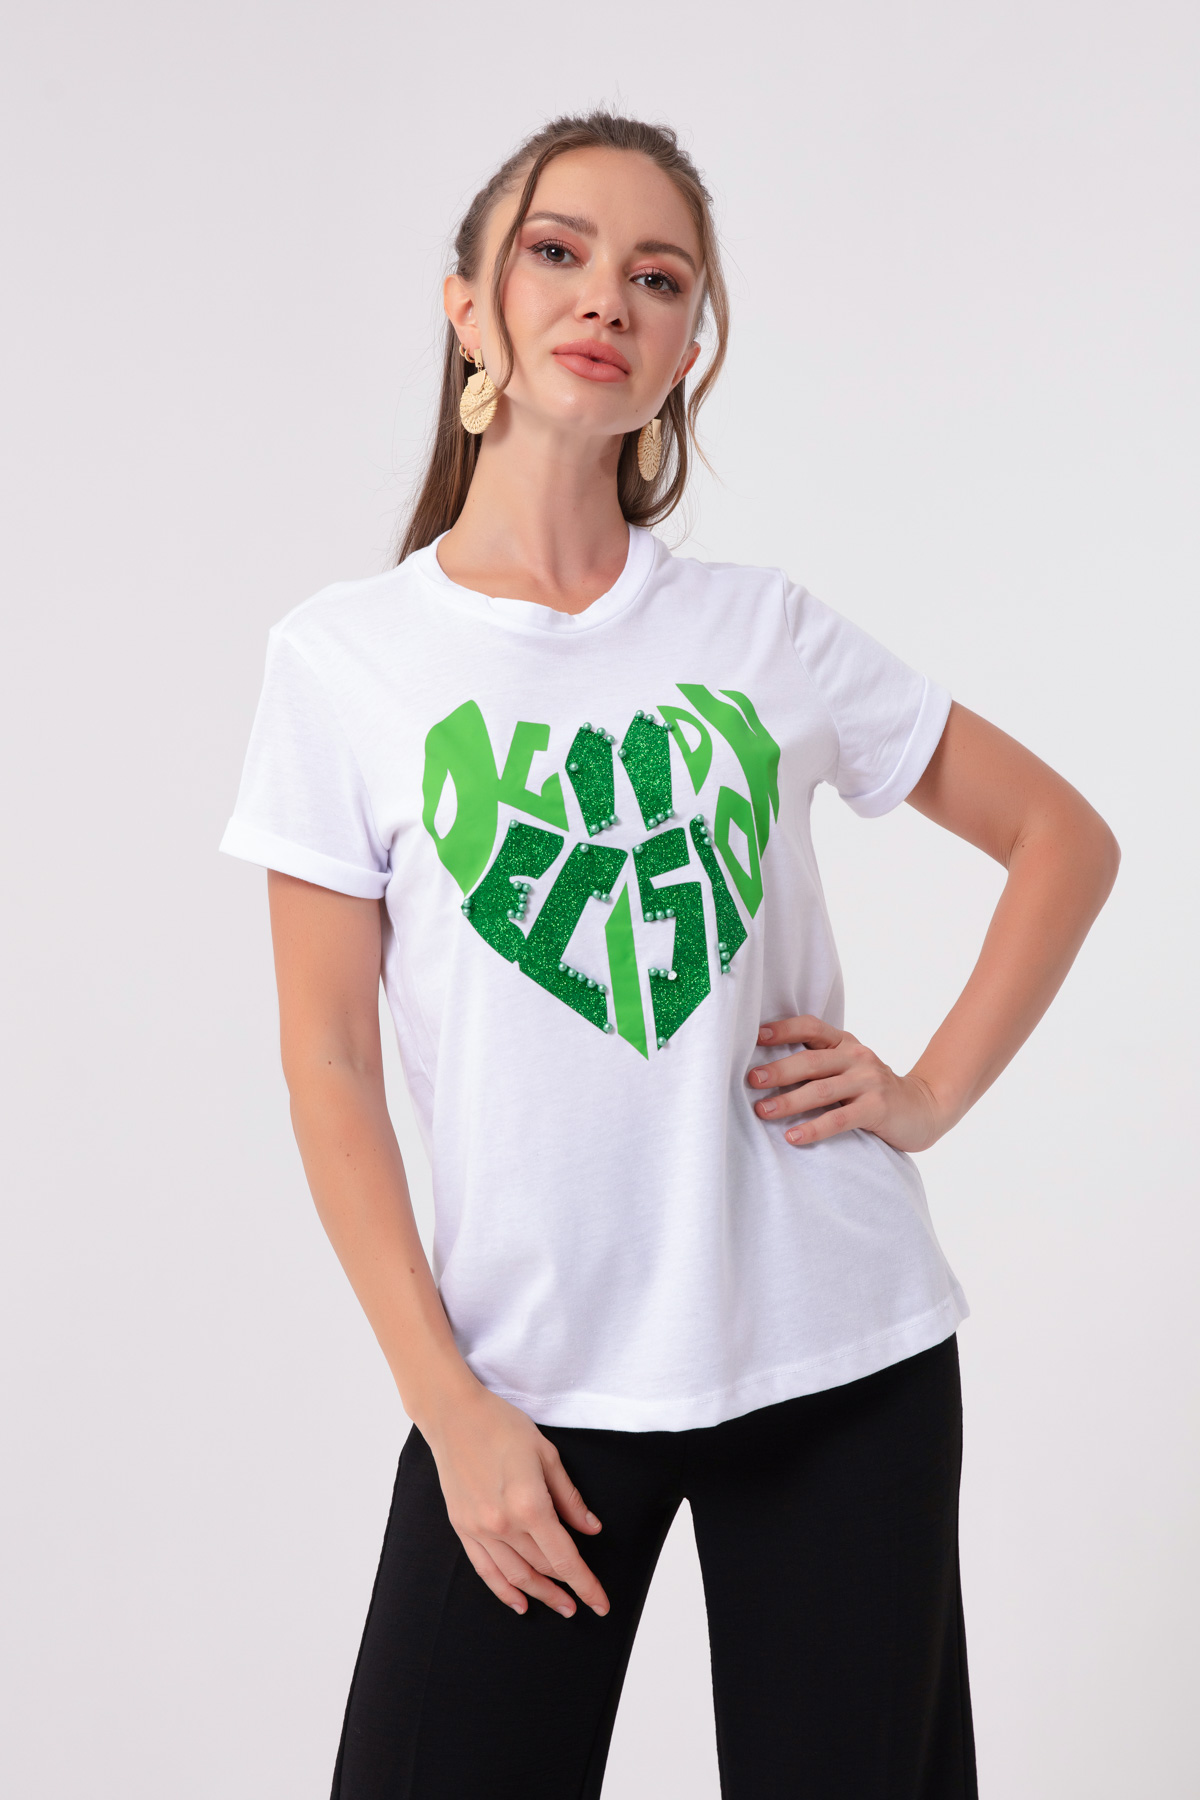 Women's White Front Printed T-Shirt